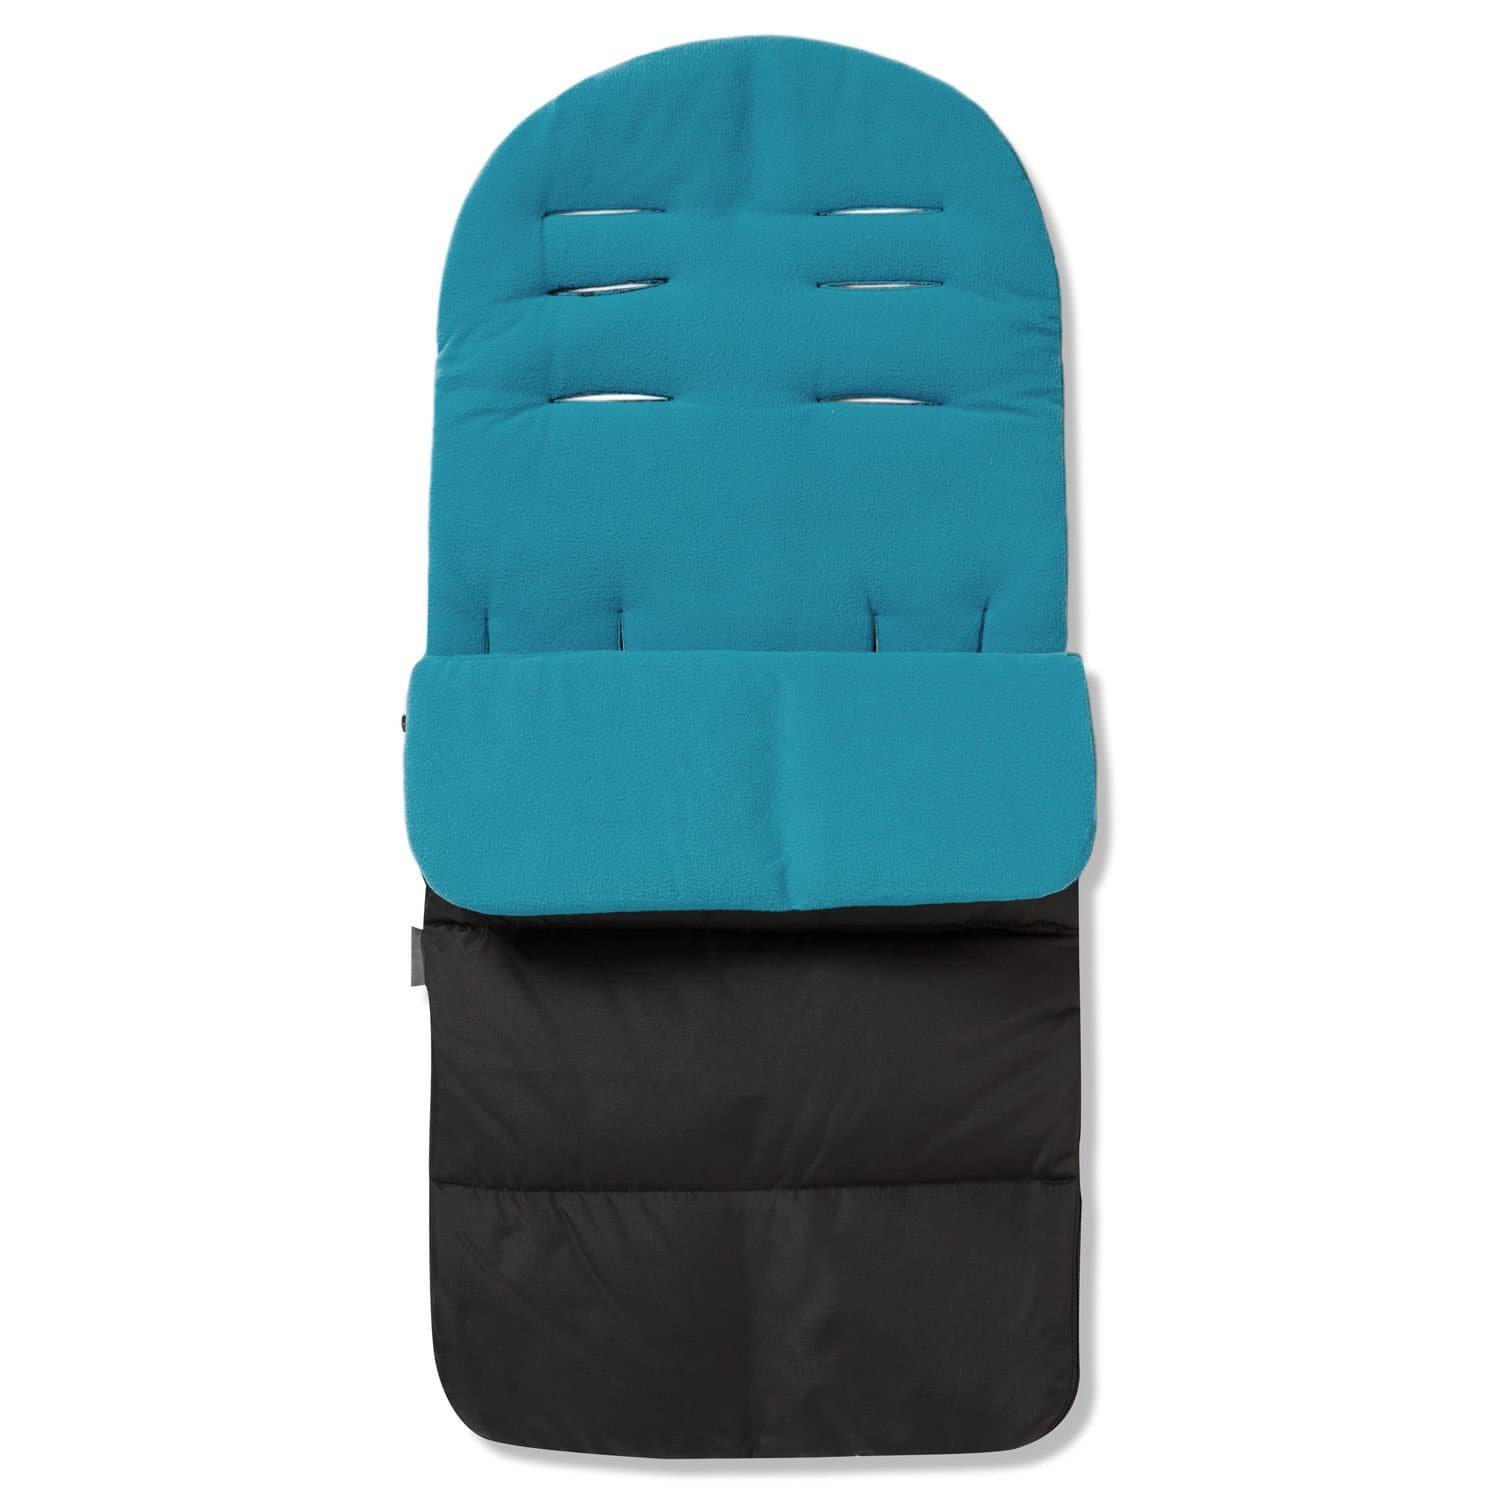 Premium Footmuff / Cosy Toes Compatible with Venicci - Ocean Blue / Fits All Models | For Your Little One